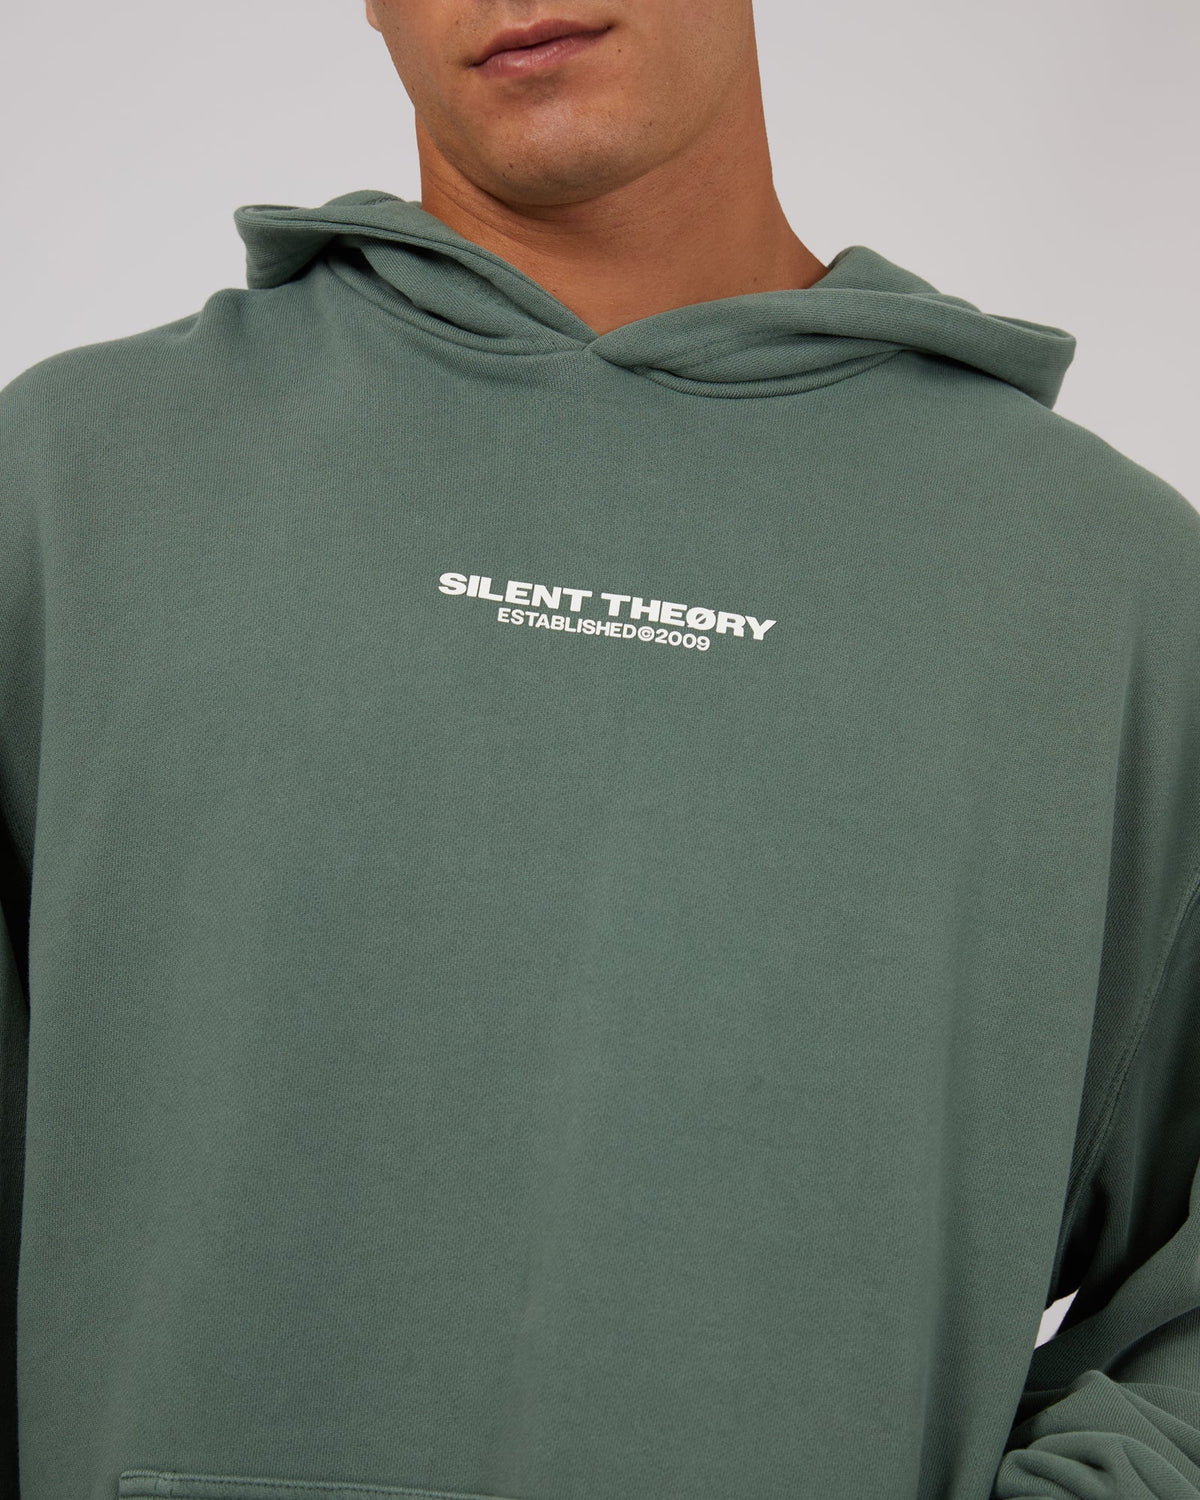 Silent Theory-Essential Theory Hoody Green-Edge Clothing